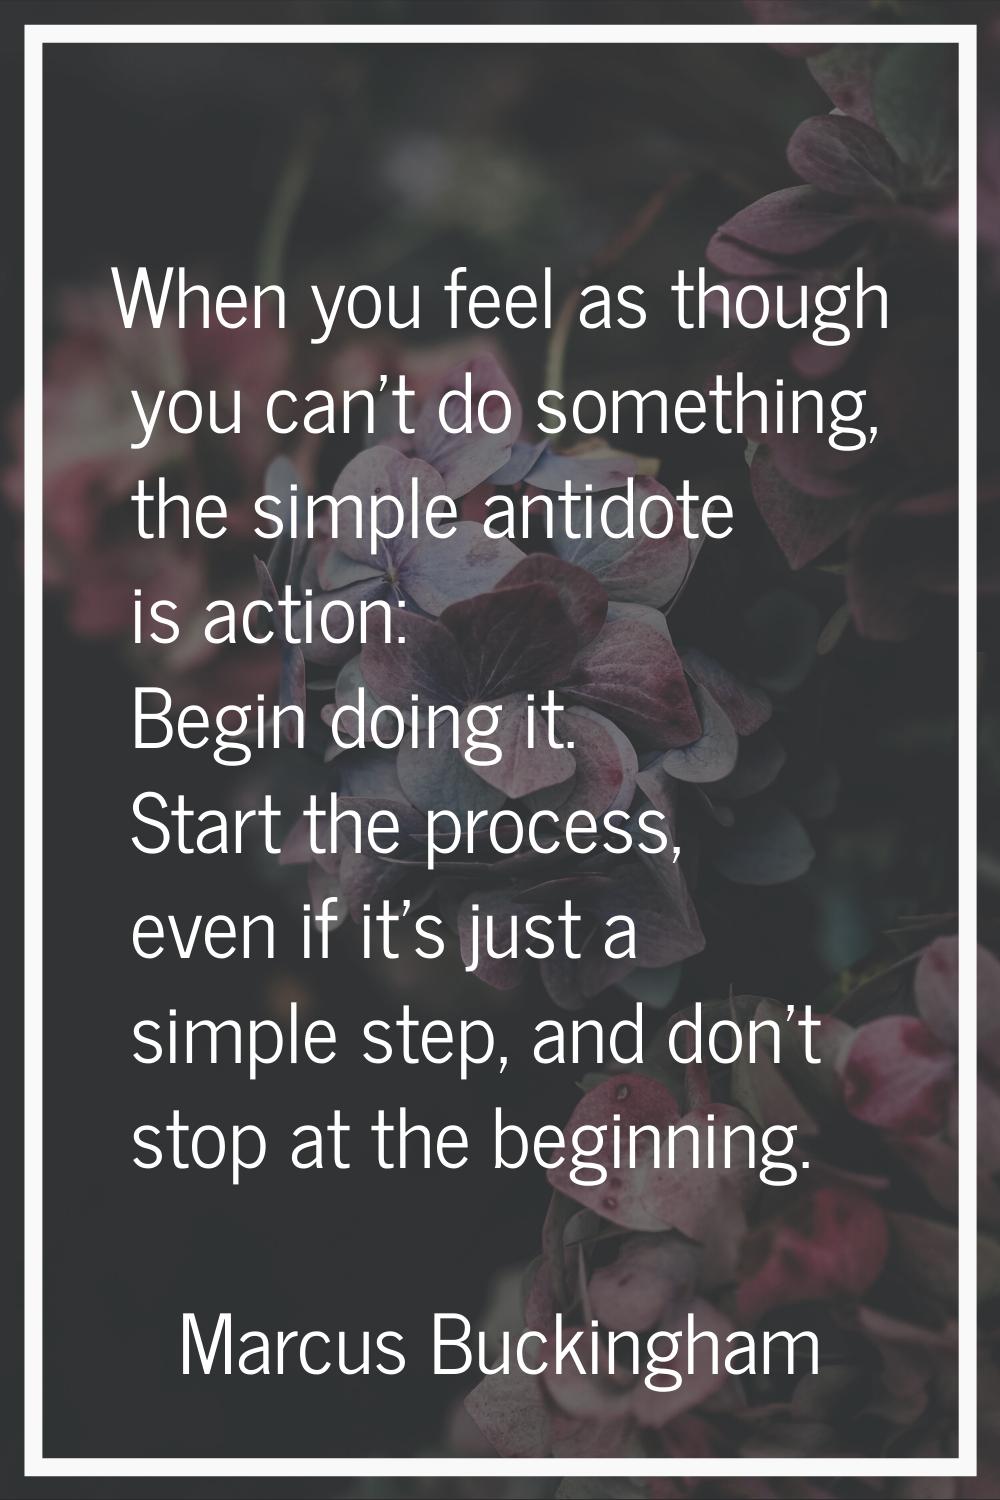 When you feel as though you can't do something, the simple antidote is action: Begin doing it. Star